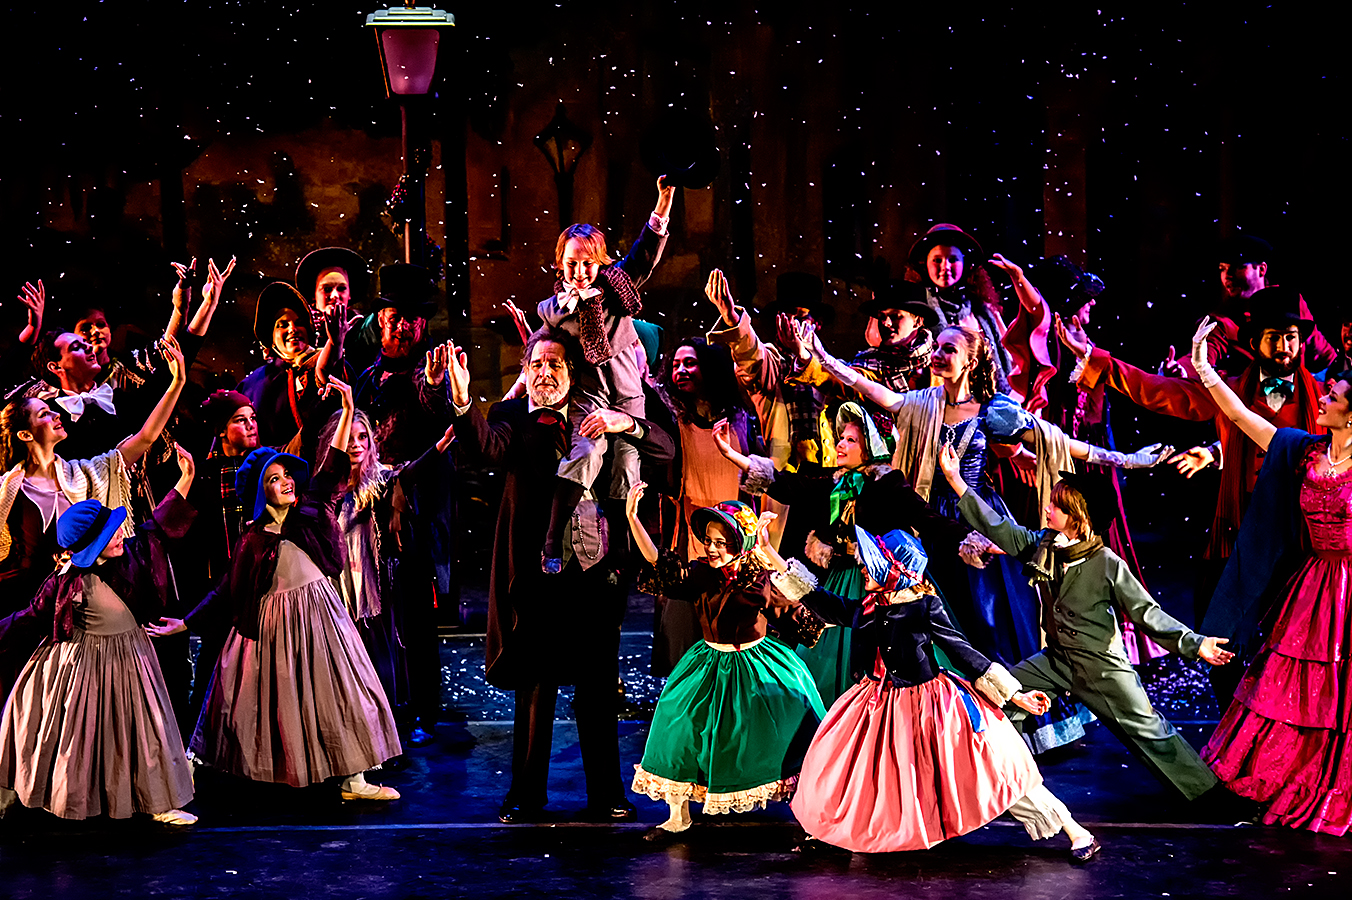 1312_0843a.jpg - Ulster Ballet Company's production of "A Christmas Carol"